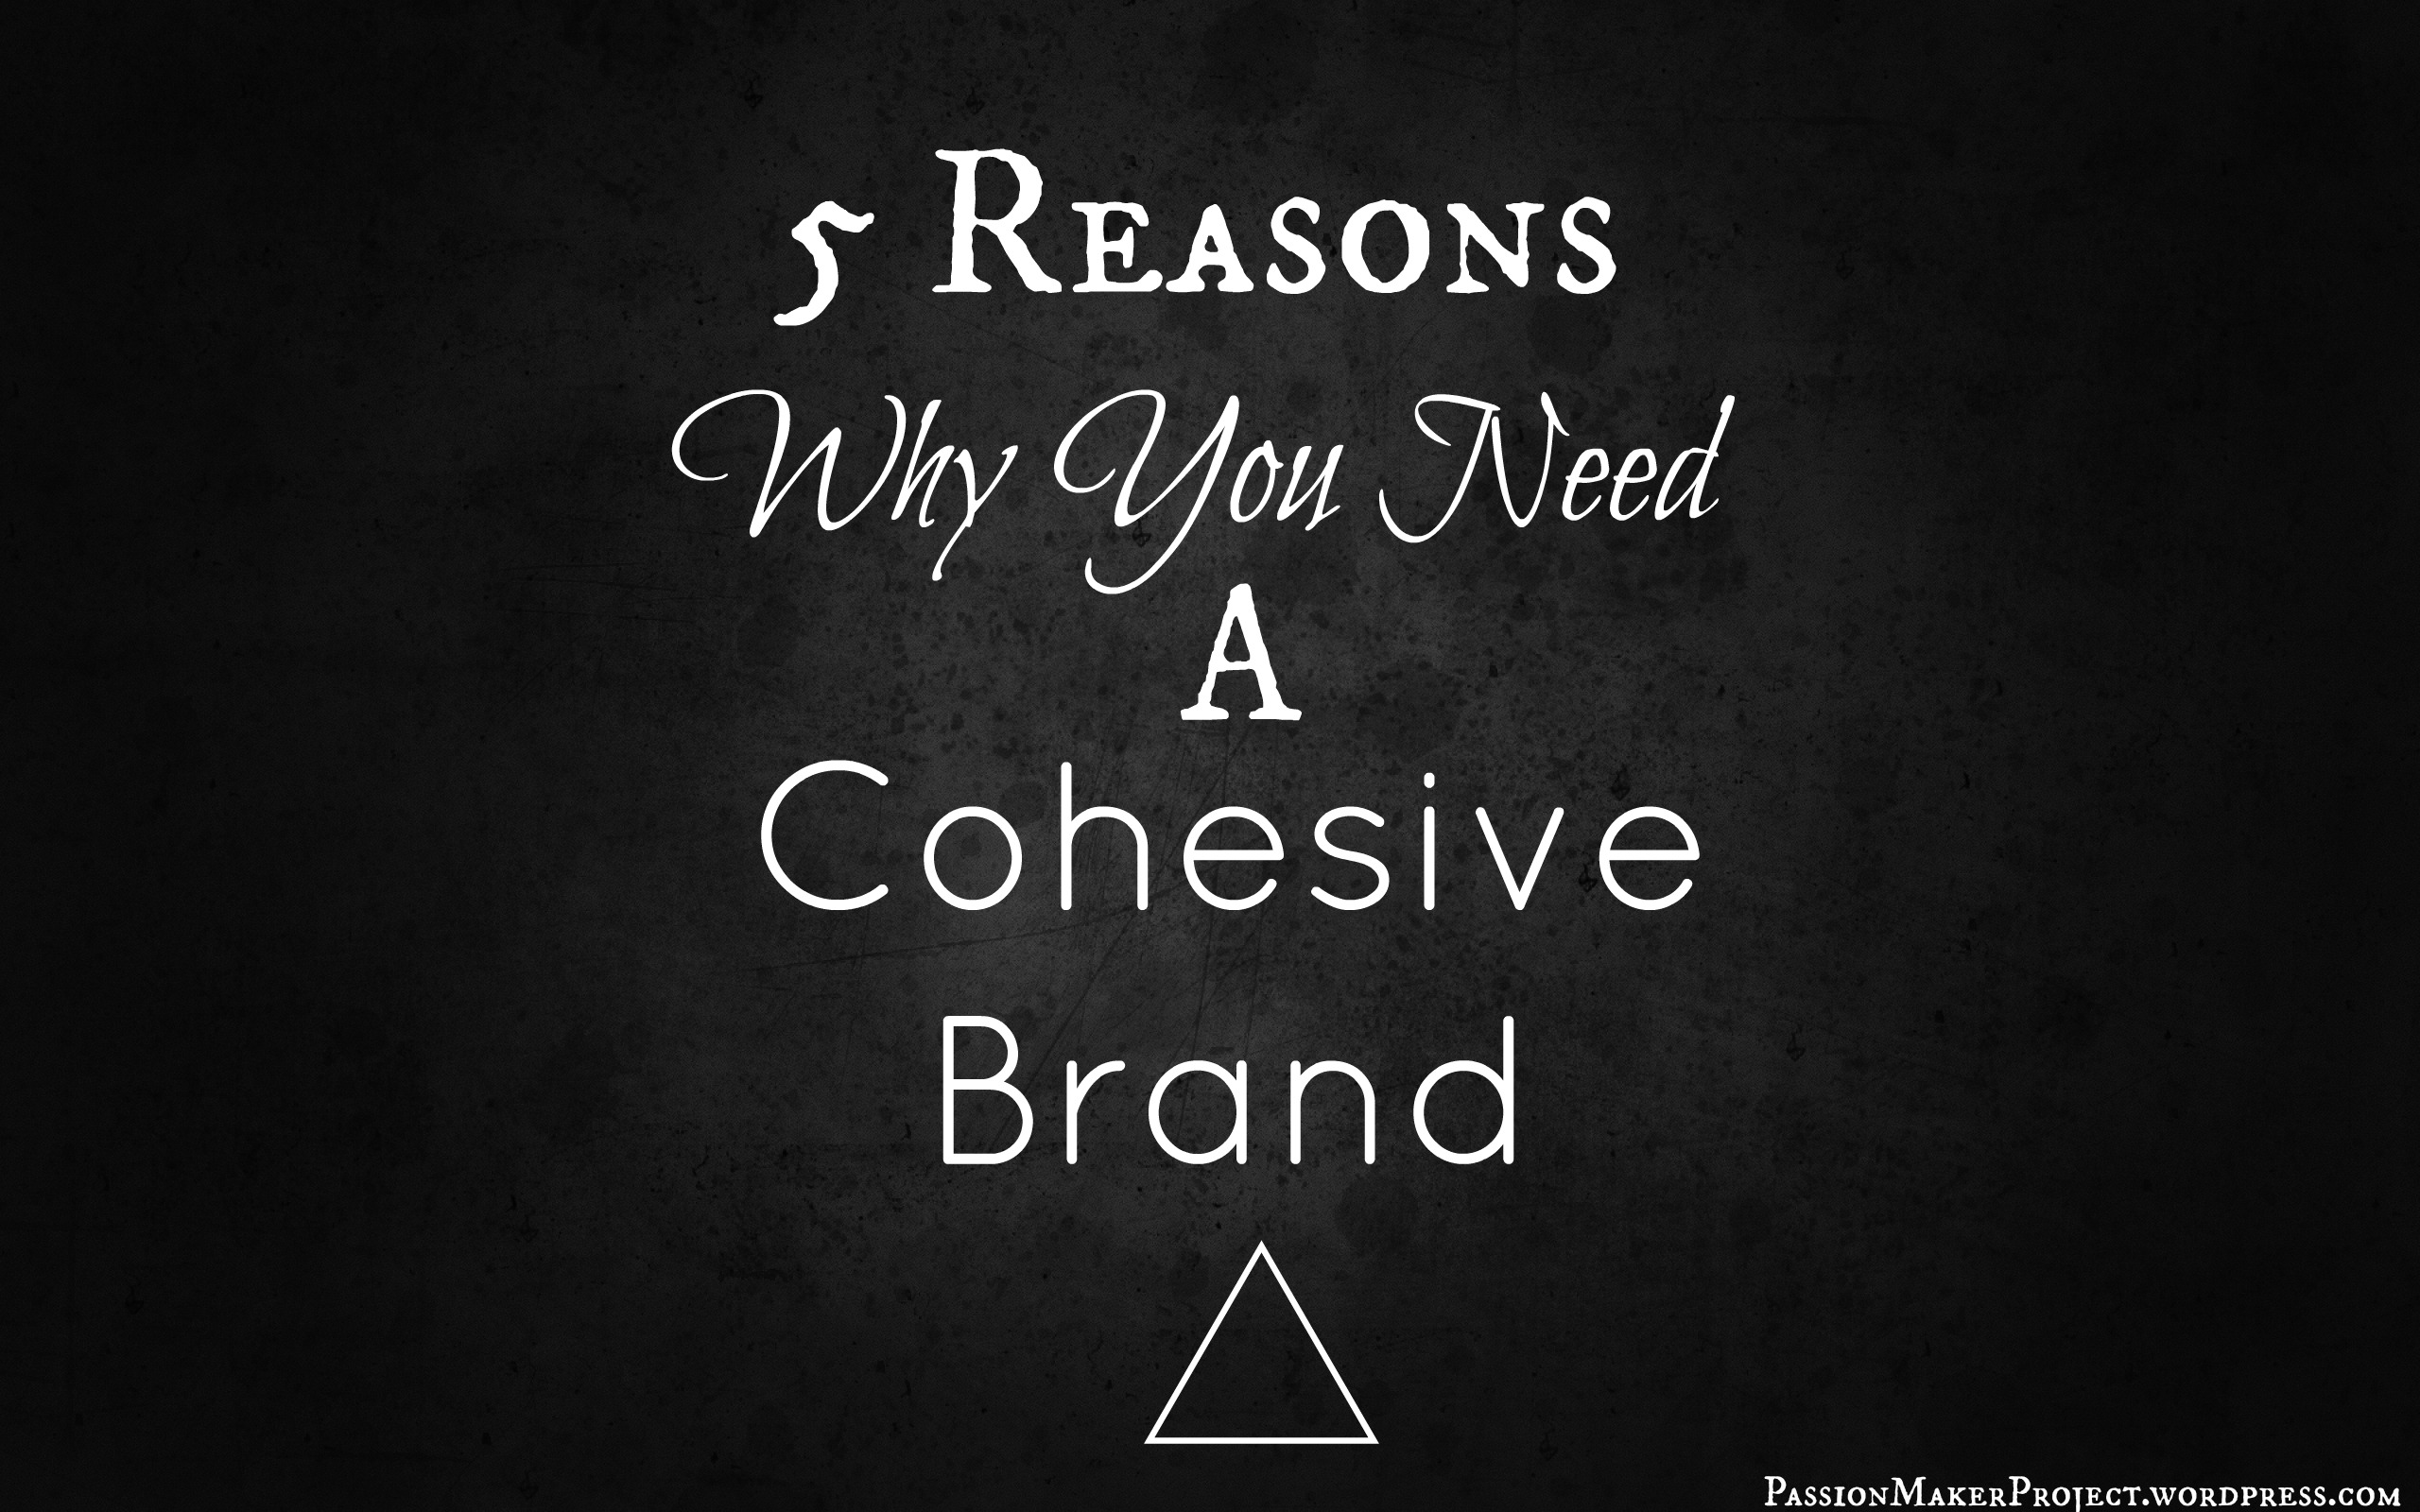 5 Reasons Why You Need A Cohesive Brand